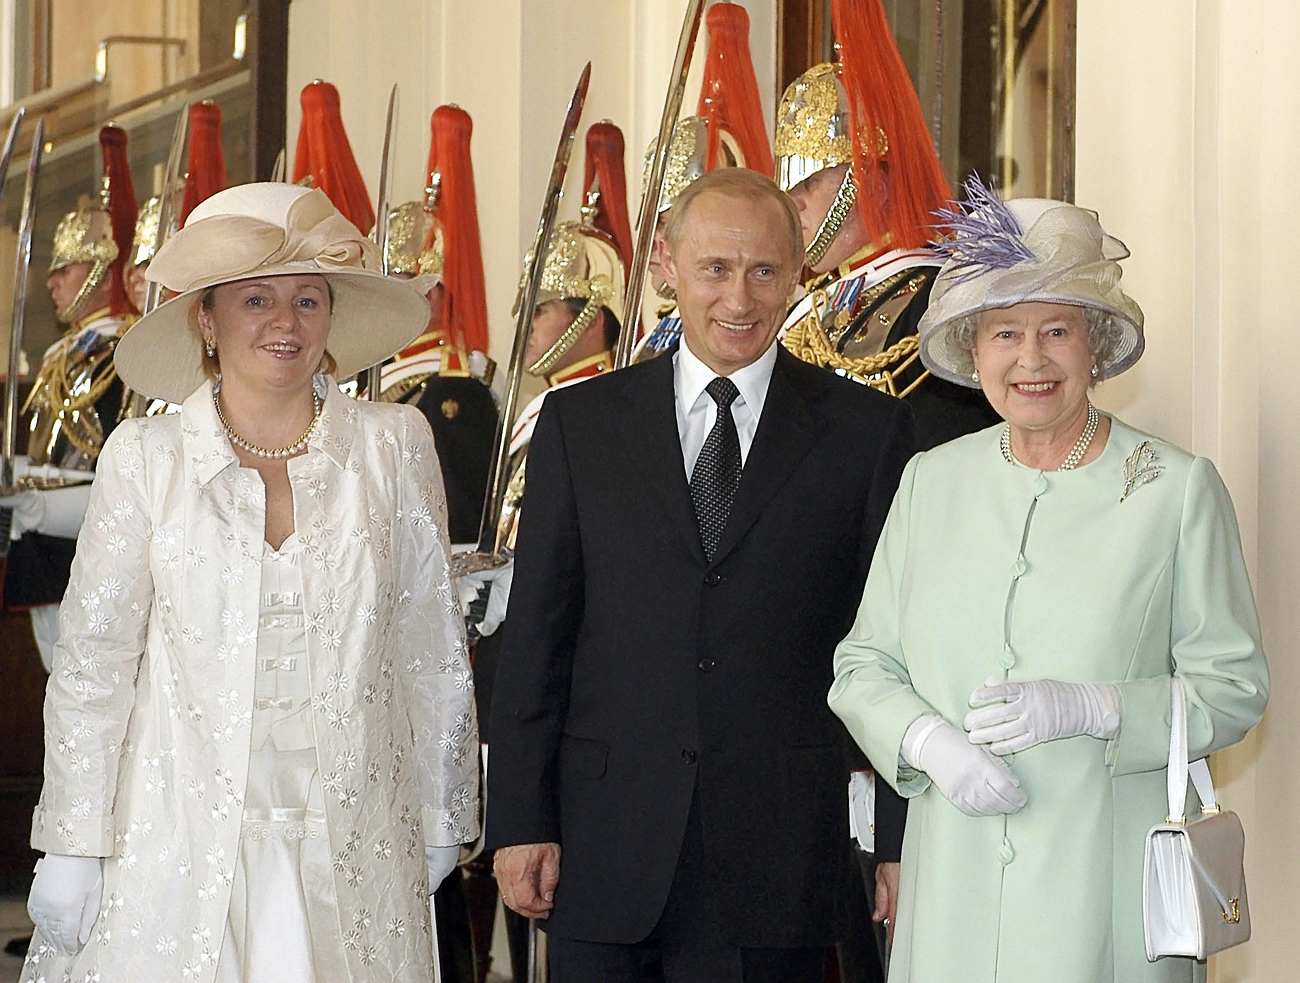 Queen of Britain Elizabeth II, President Putin, who arrived in Britain for a state visit, and his wife Lyudmila (L). Source: Alexey nov / RIA Novosti